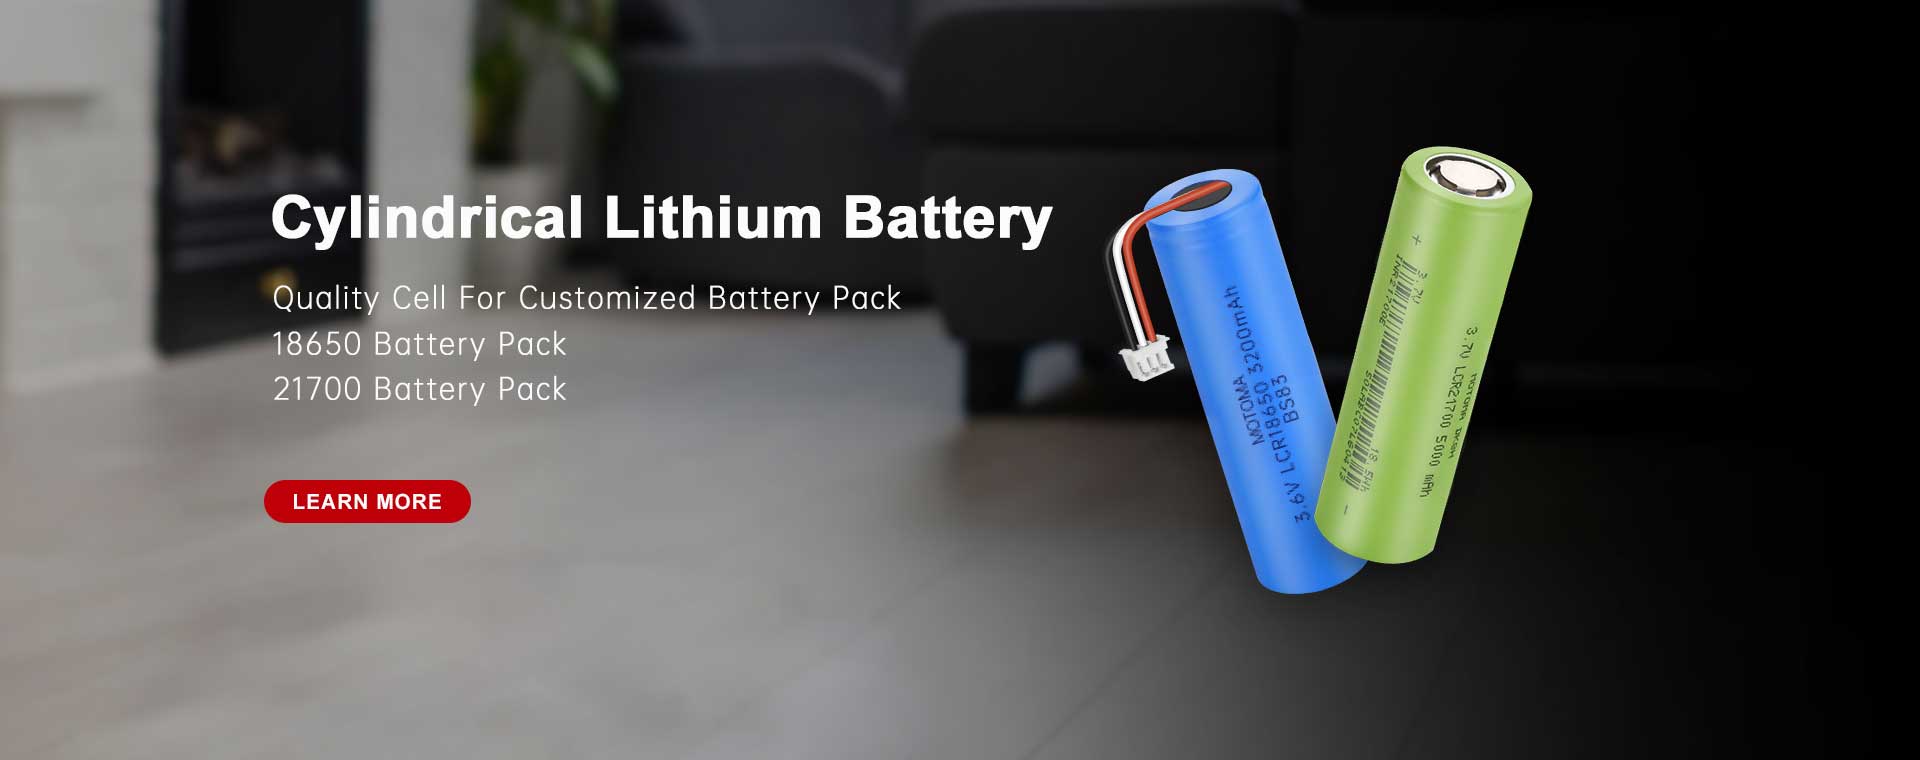 cylindrical lithium-ion battery 